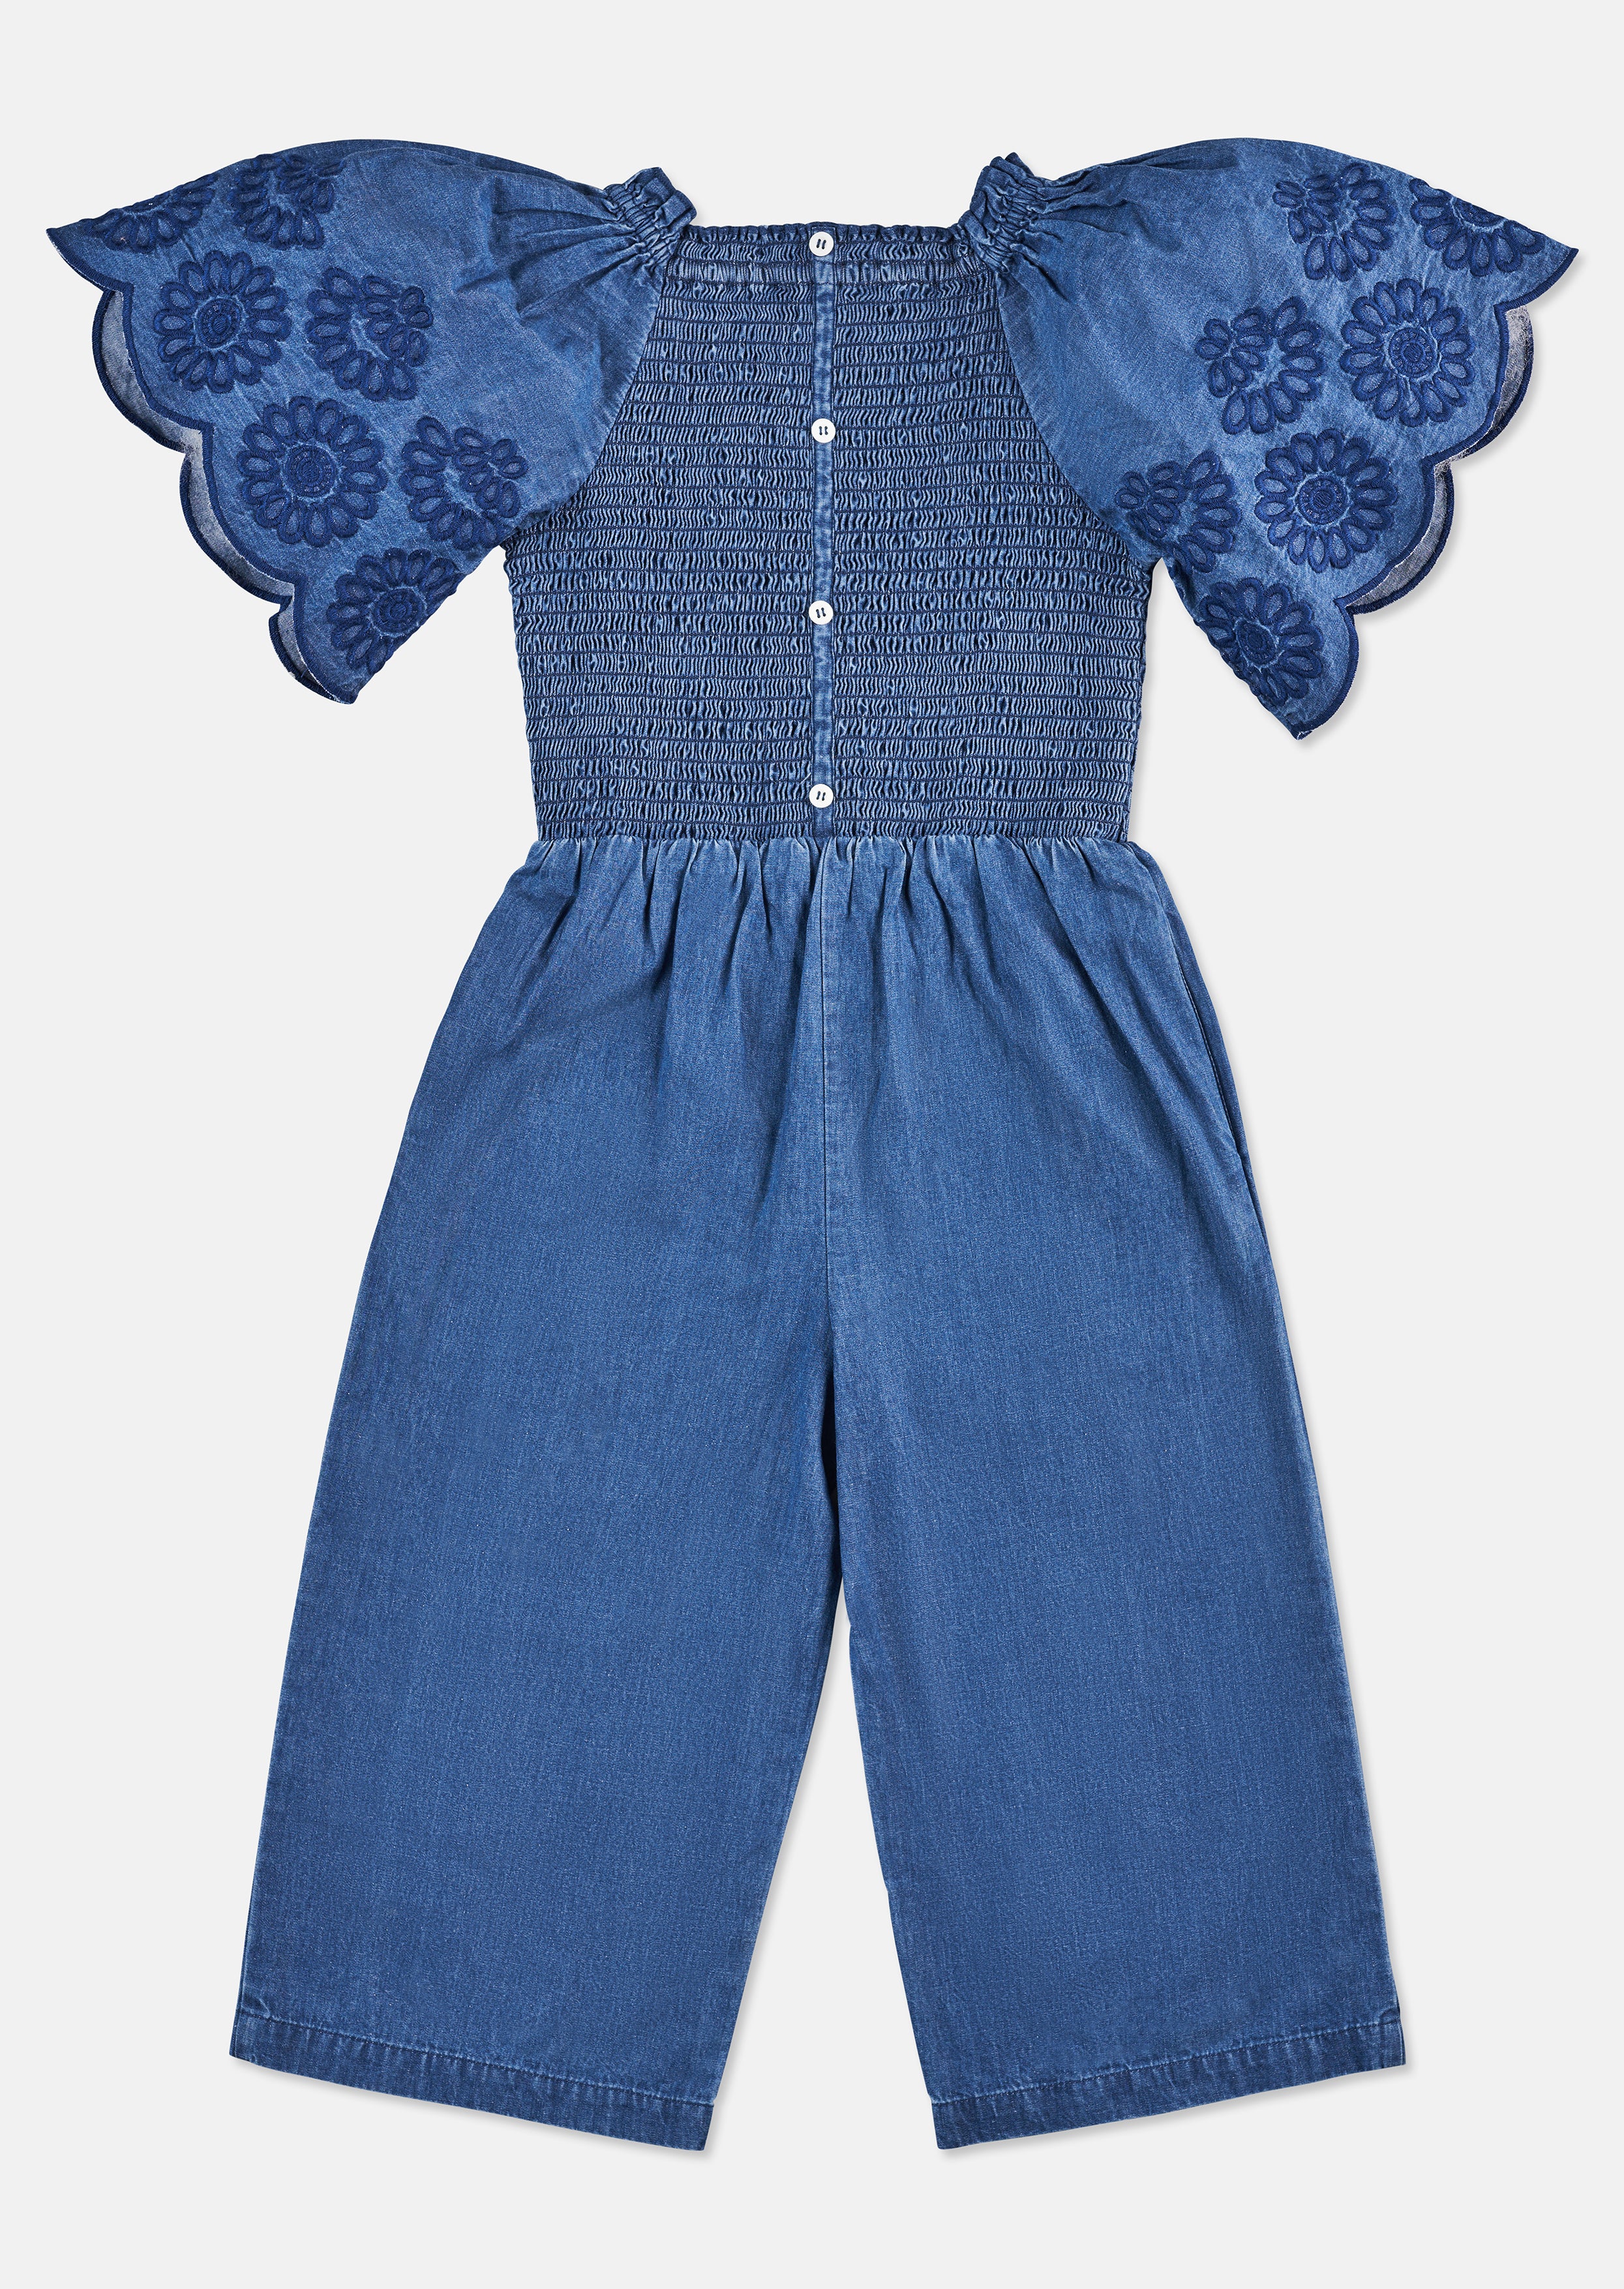 Girls Blue Denim Jumpsuit with Embroidered Sleeves